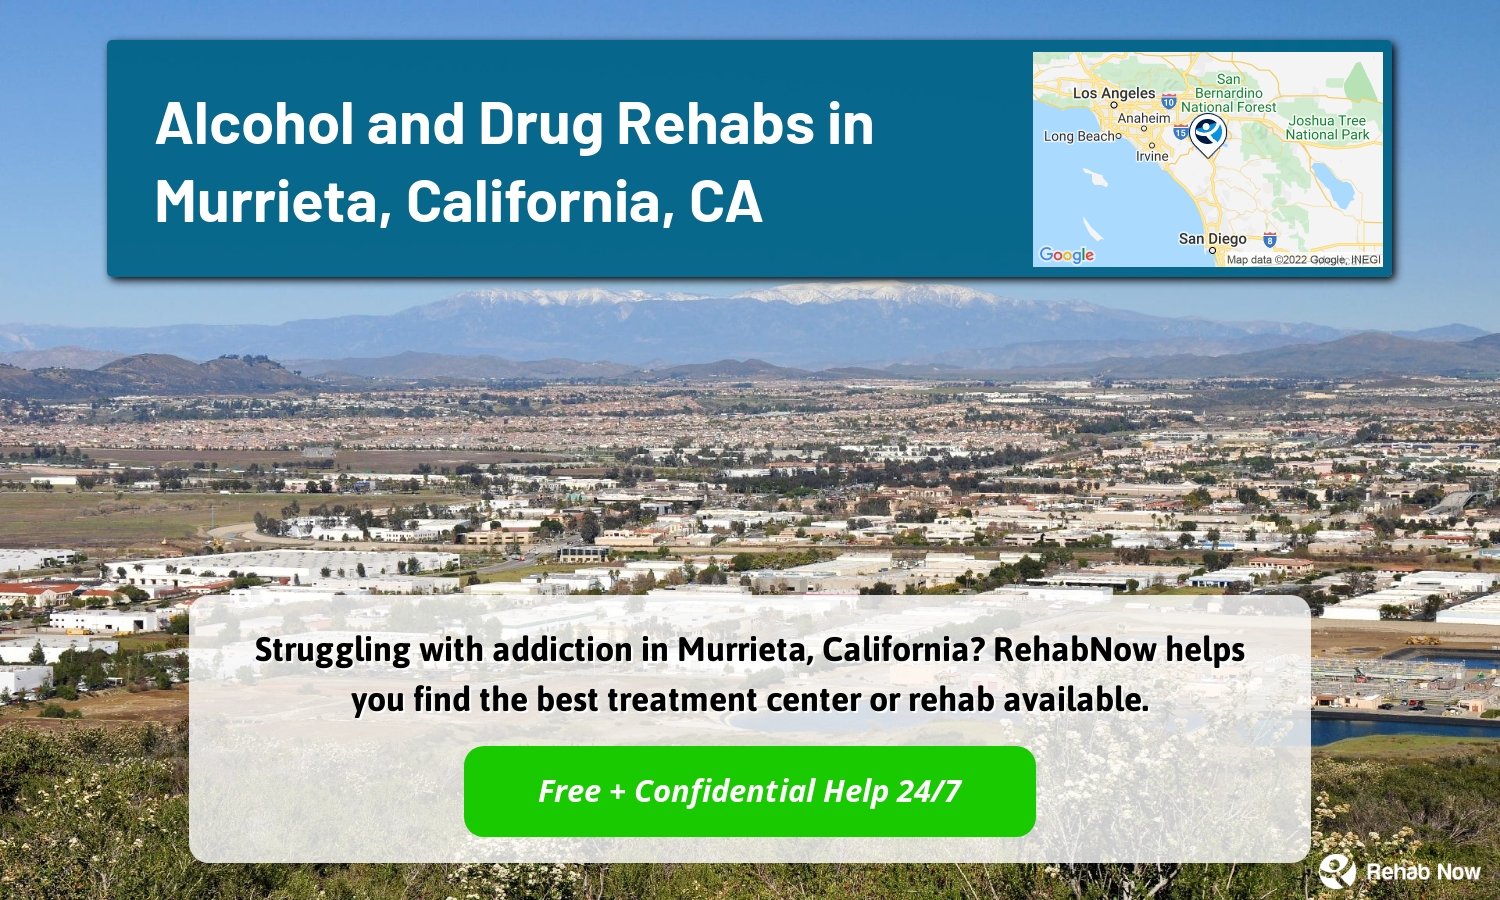 Struggling with addiction in Murrieta, California? RehabNow helps you find the best treatment center or rehab available.